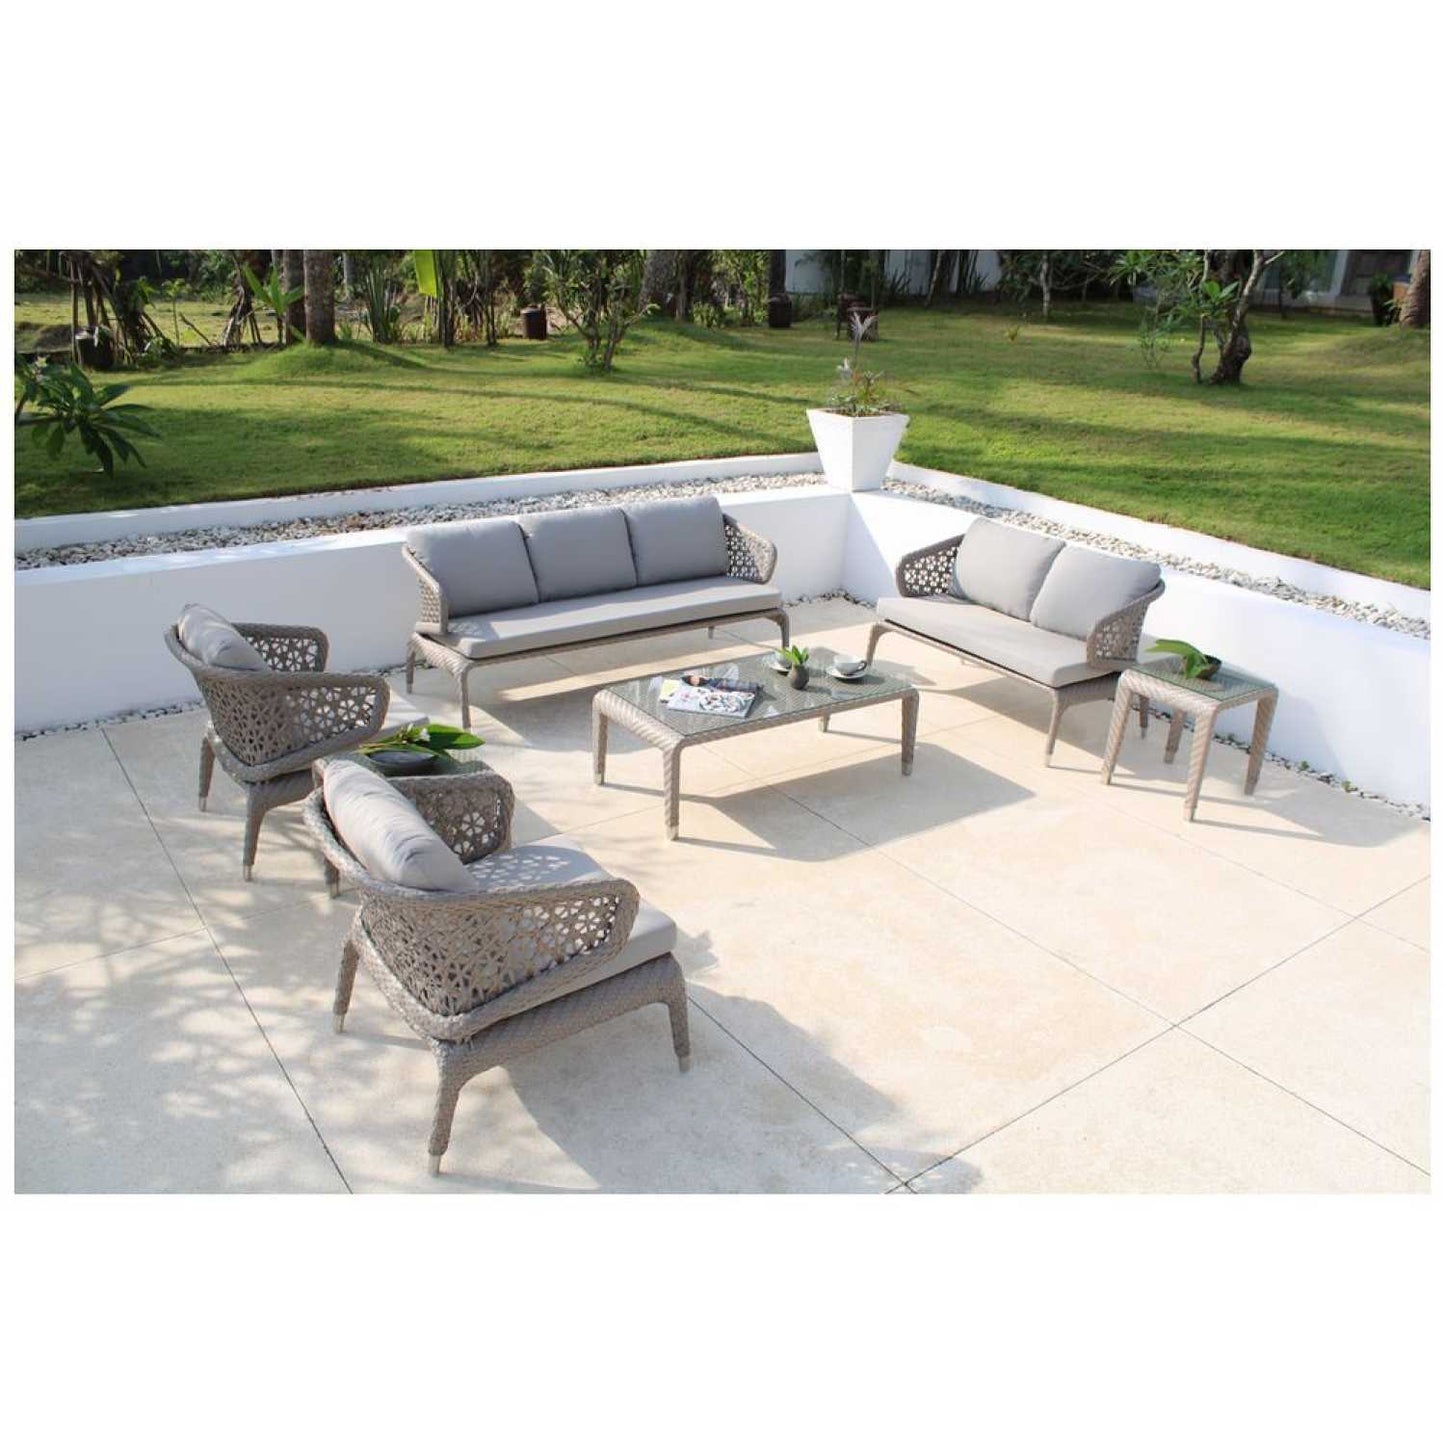 Journey Silver Walnut Arm Chair - PadioLiving - Journey Silver Walnut Arm Chair - Outdoor Arm Chair - PadioLiving